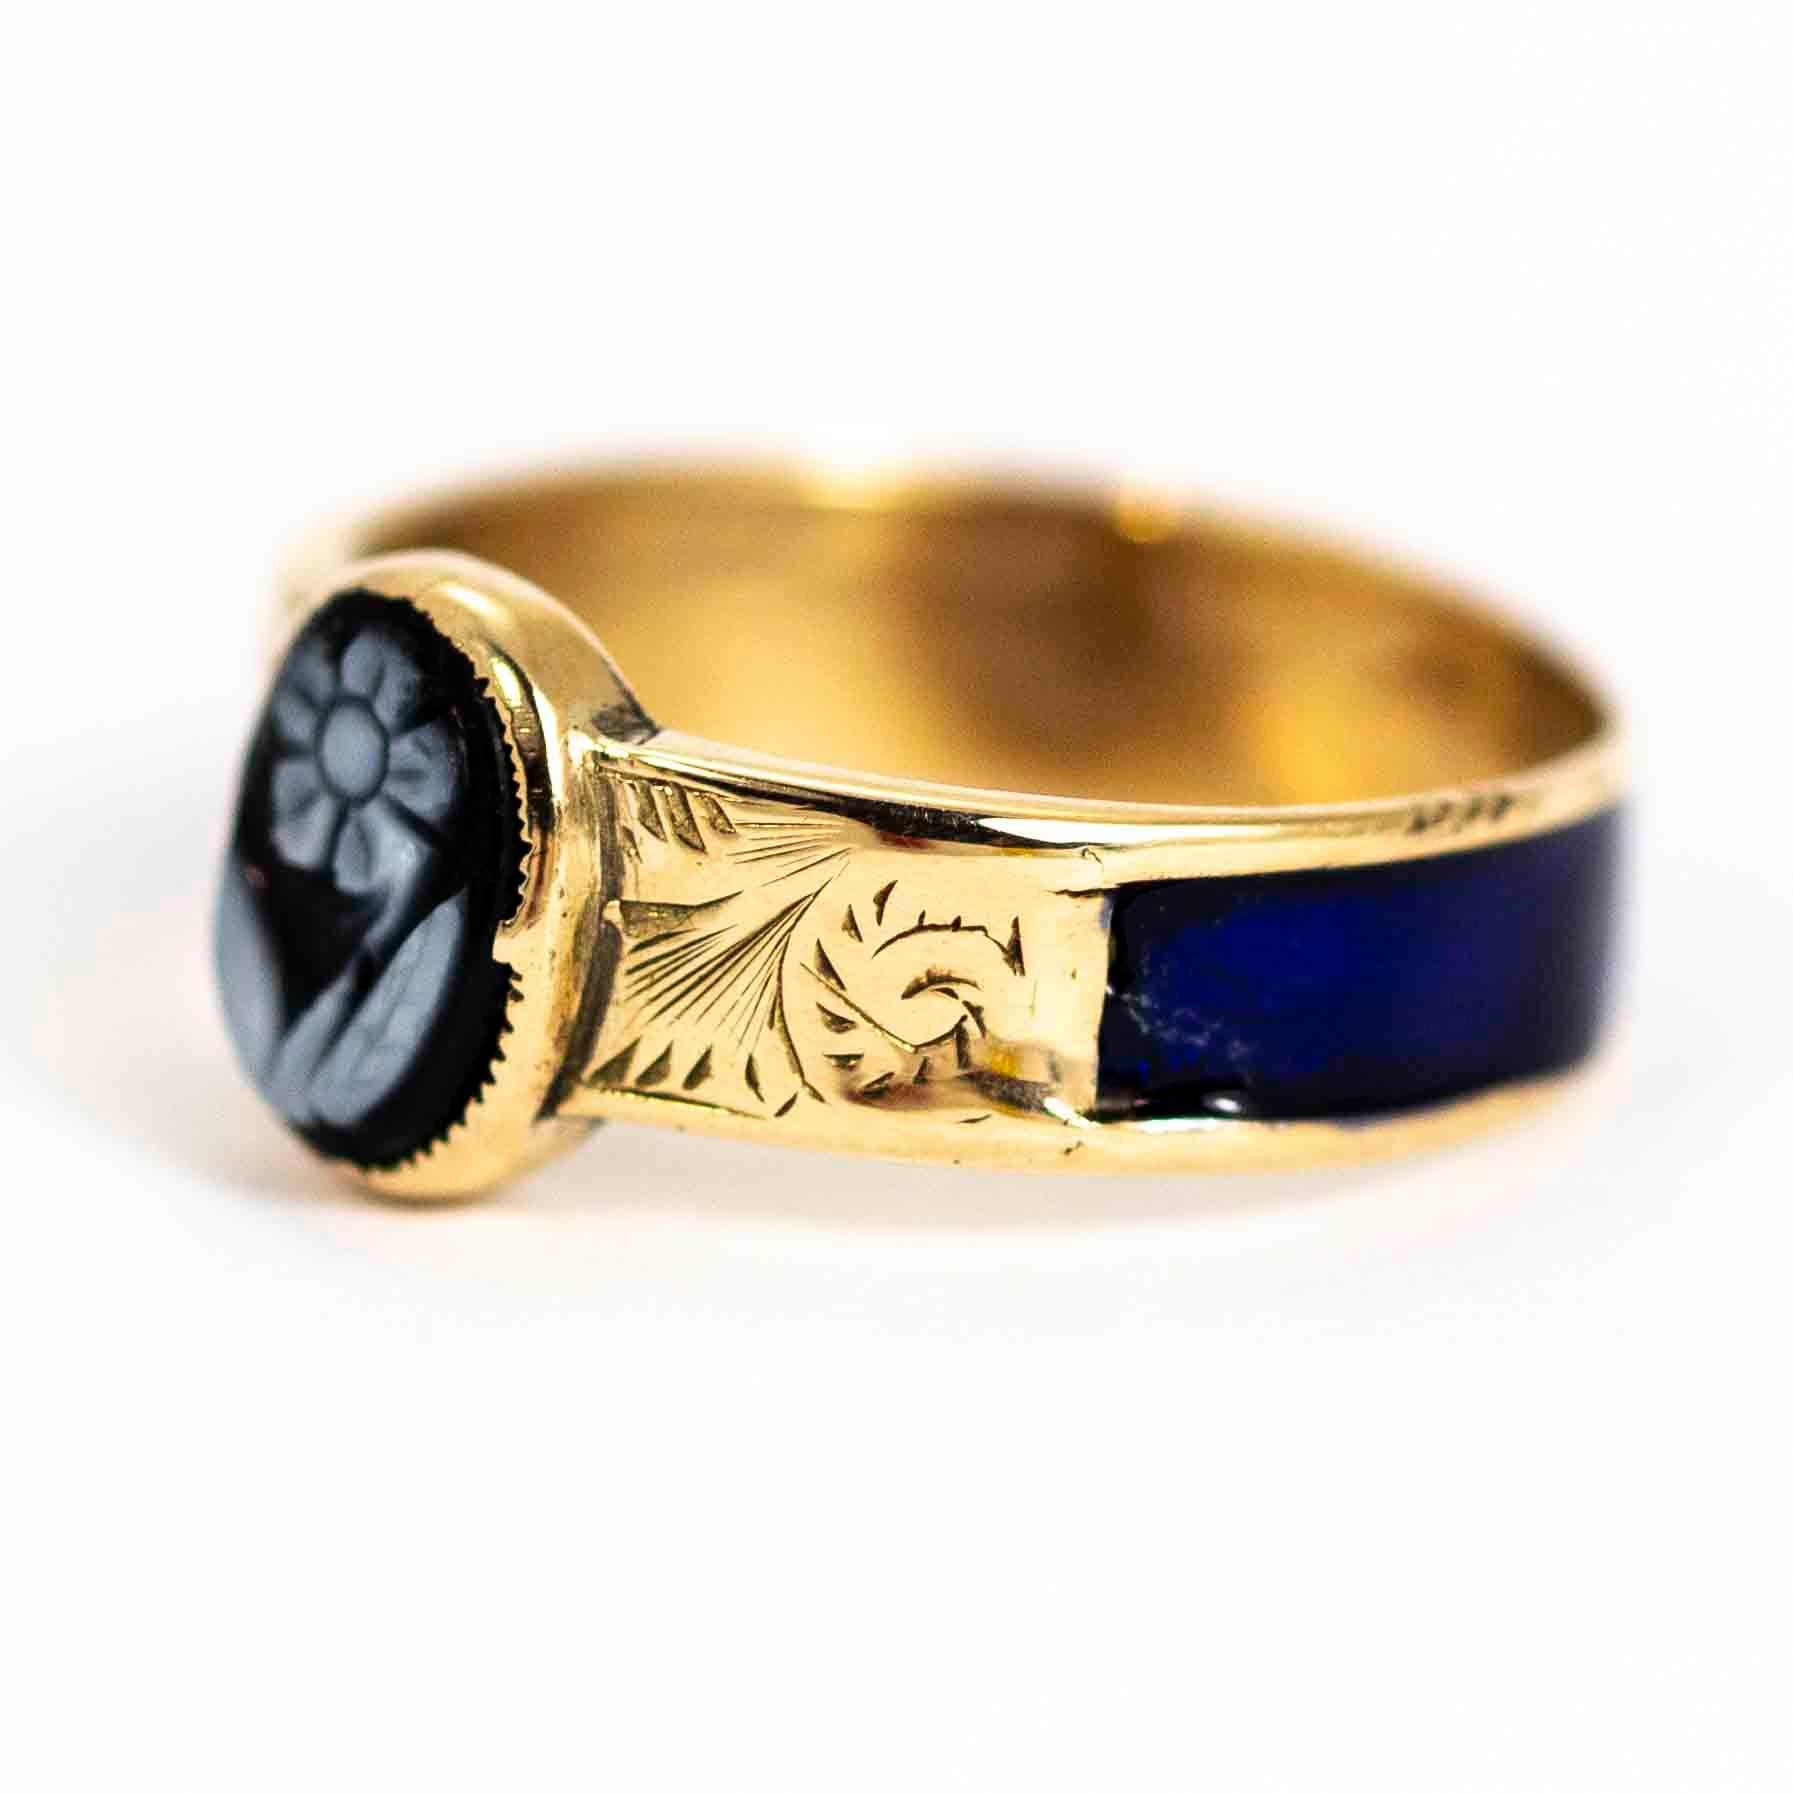 A beautiful antique ring from the Victorian period. Fronted with a oval sardonyx hand-carved into a wonderful forget me not flower. The shoulders are set with stunning hand-chased detailing and the rear of the band is set with royal blue enamel.